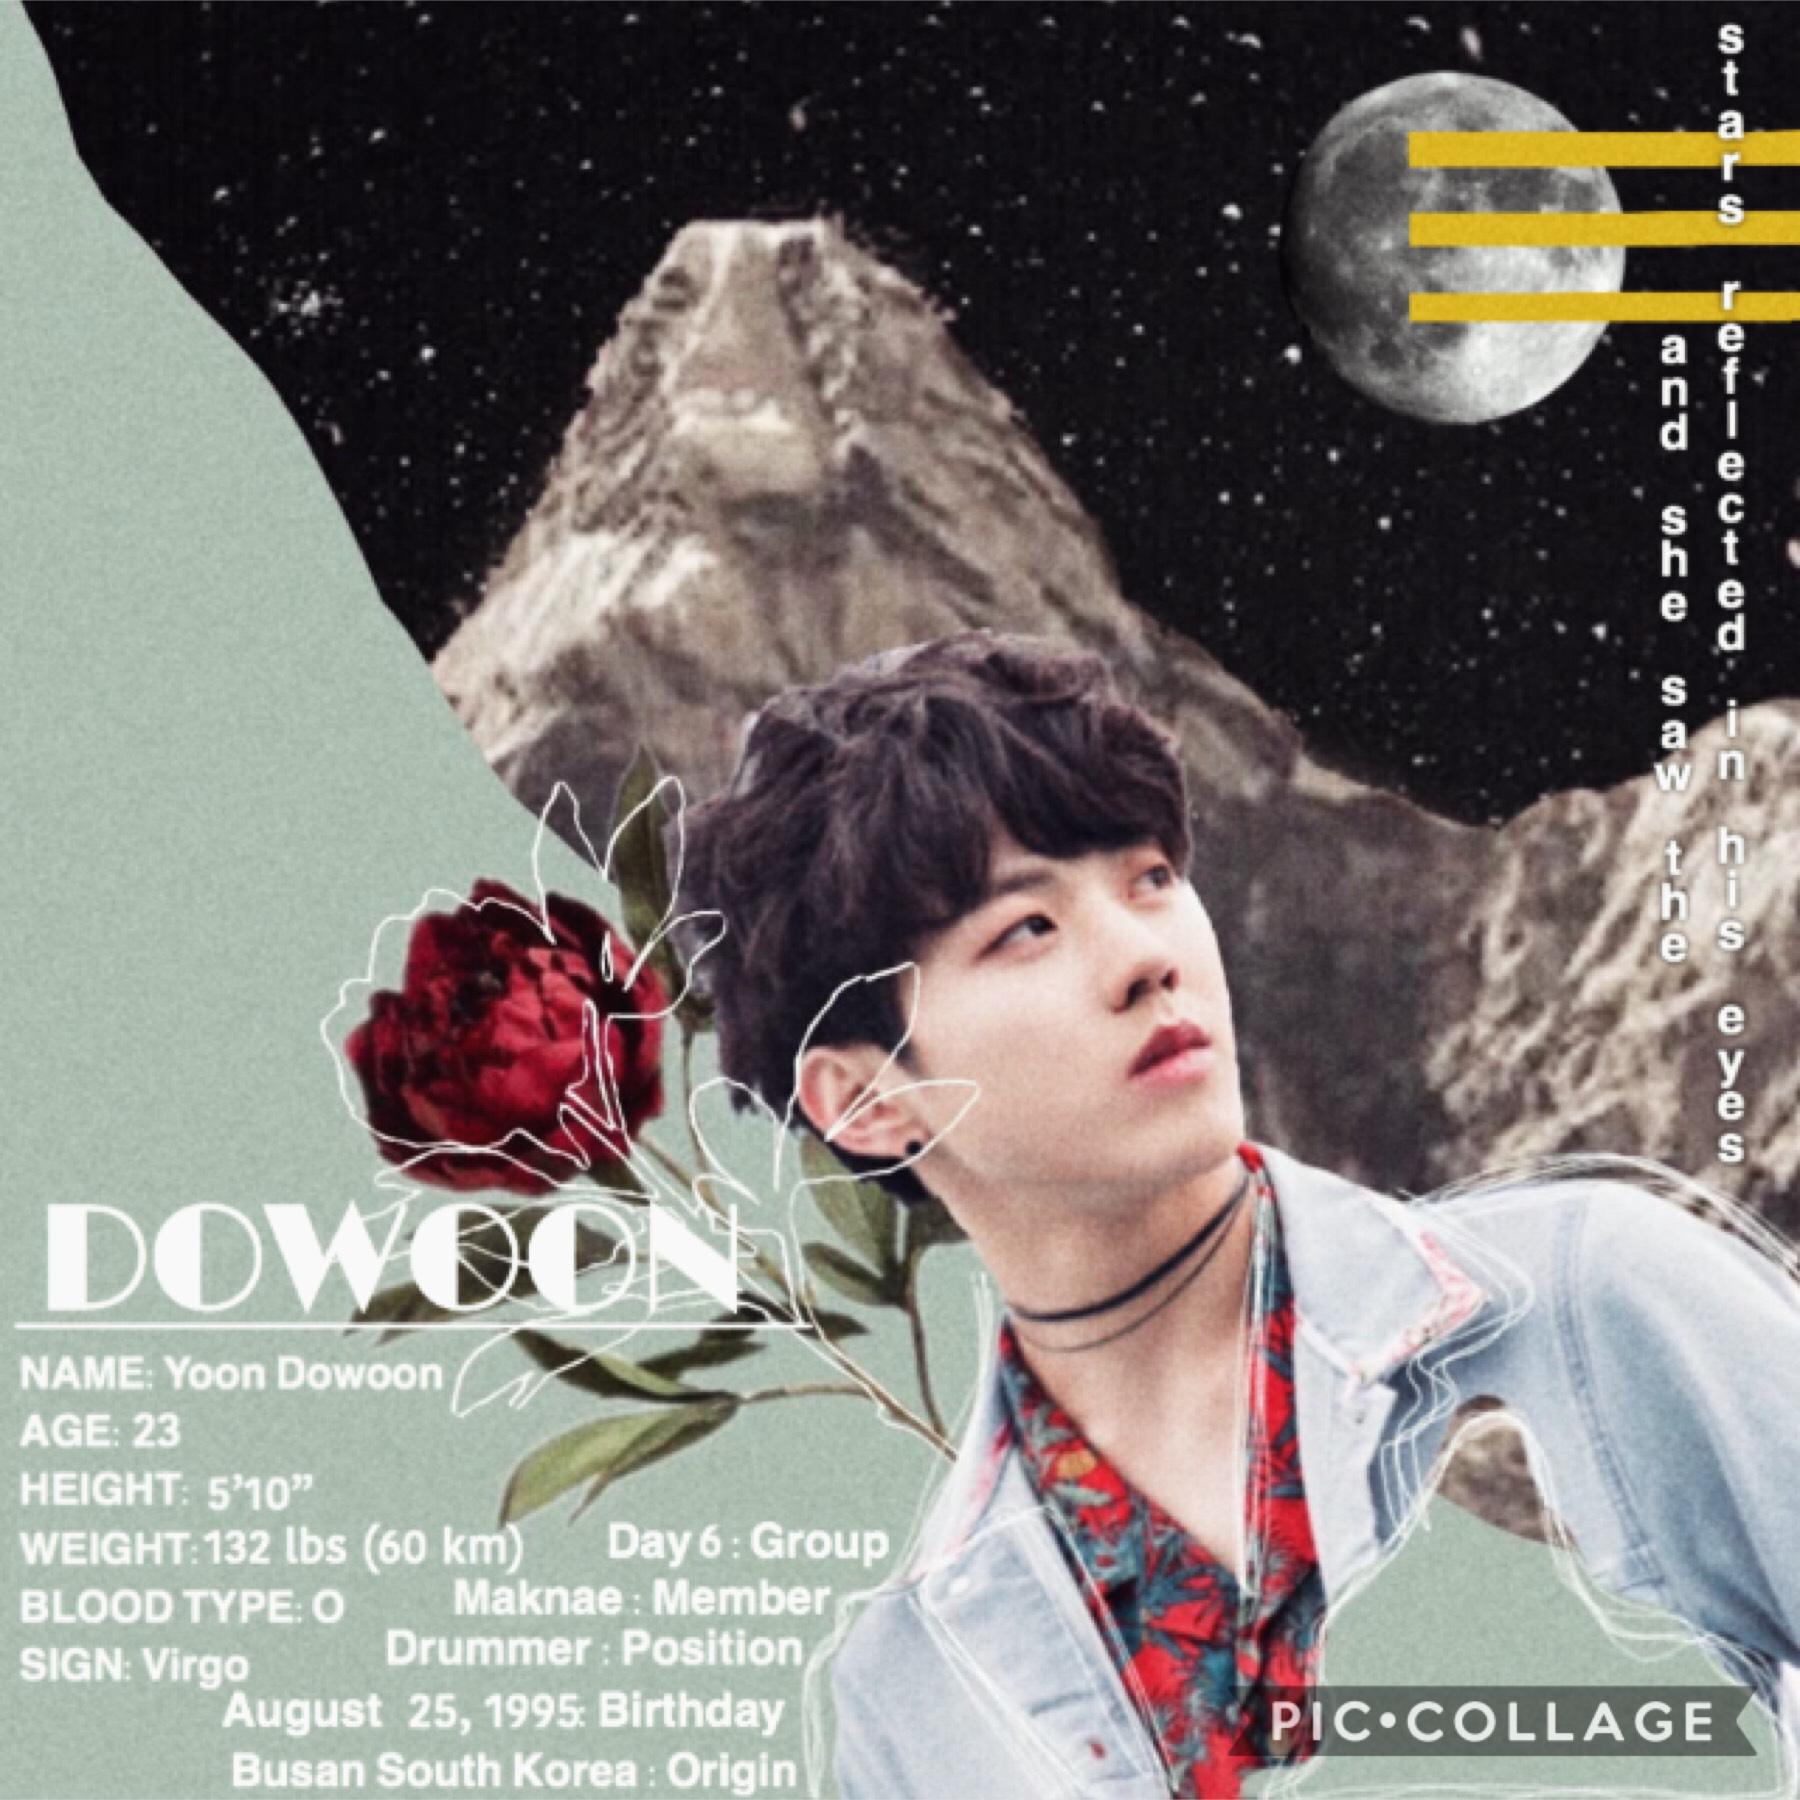 🍚🍚hIGH rICE🍚🍚
[qotd: m&ms or skittles?
aotd: skittles all the way]
•••

Ahhhh i hope the amount of edits i post isn’t annoying😬😬😬
Ugh Dowoon makes me fluffy inside uwu hope y’all r doing amazing💞